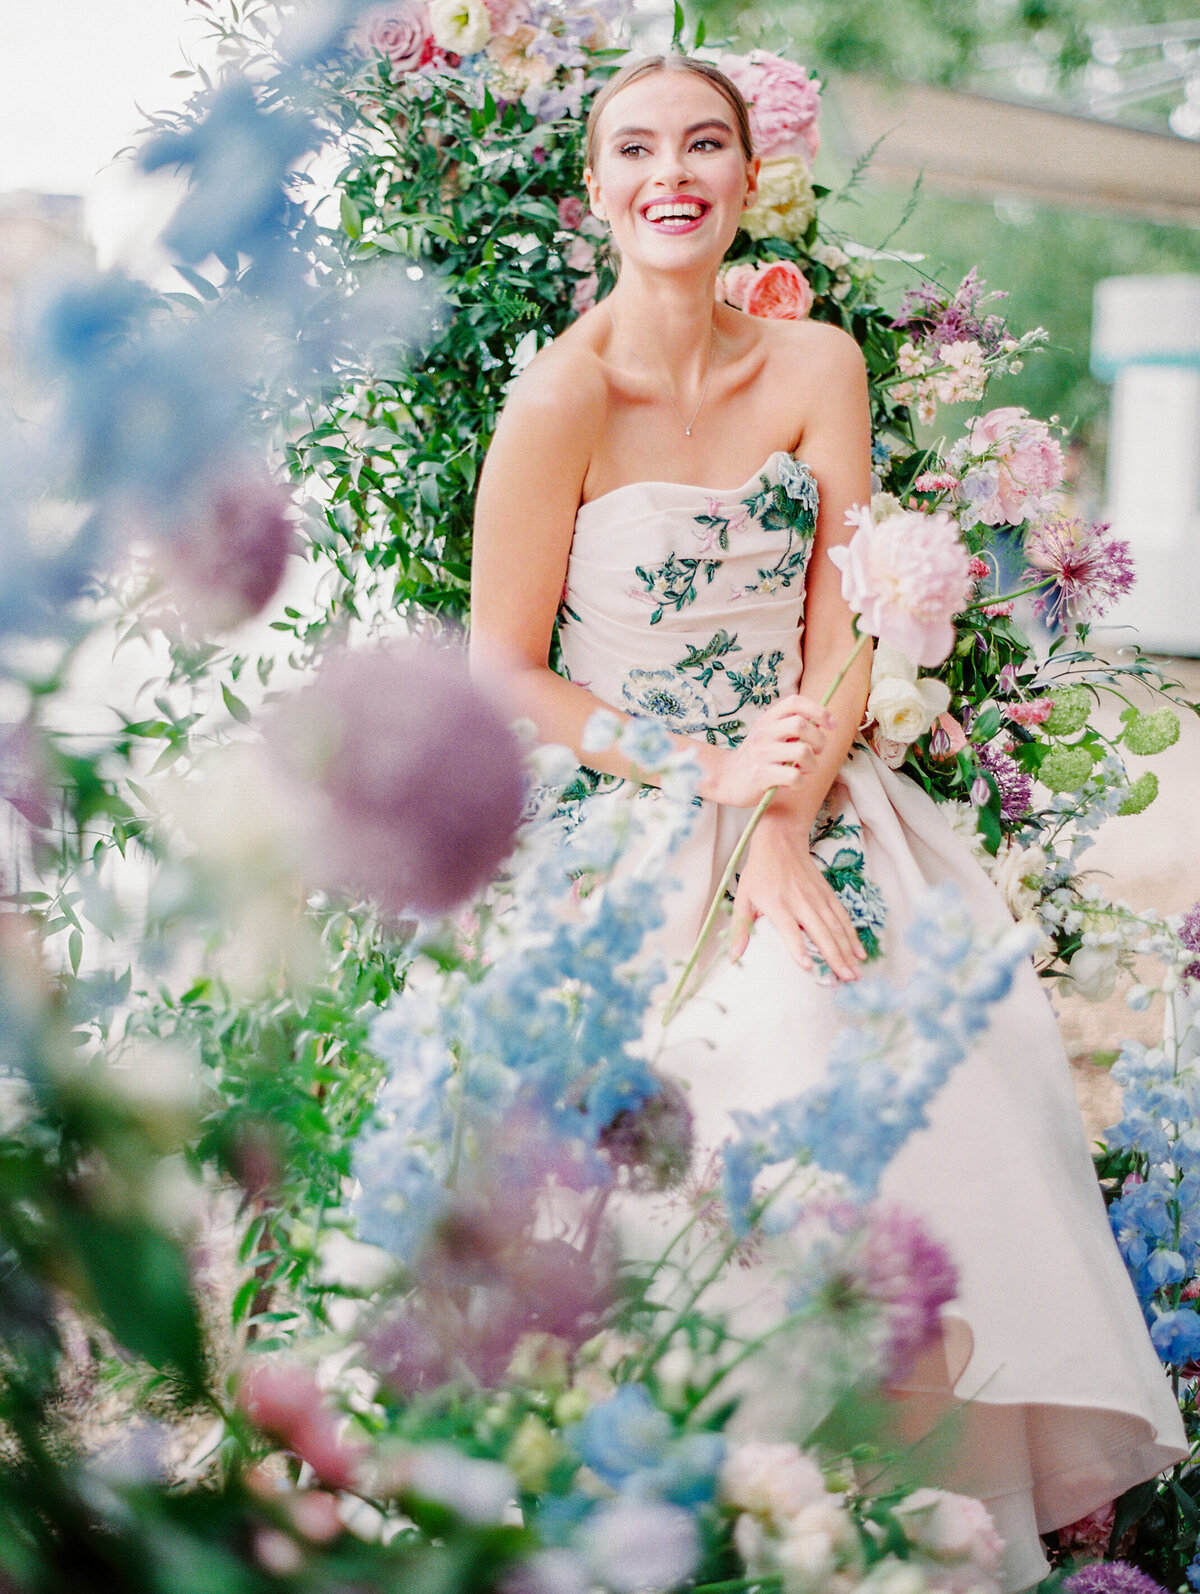 Bride at pre-wedding bridal session in Paris on the Seine River surrounded by colorful florals while wearing a strapless pink gown with embroidered colorful flowers photographed by Paris wedding photographer